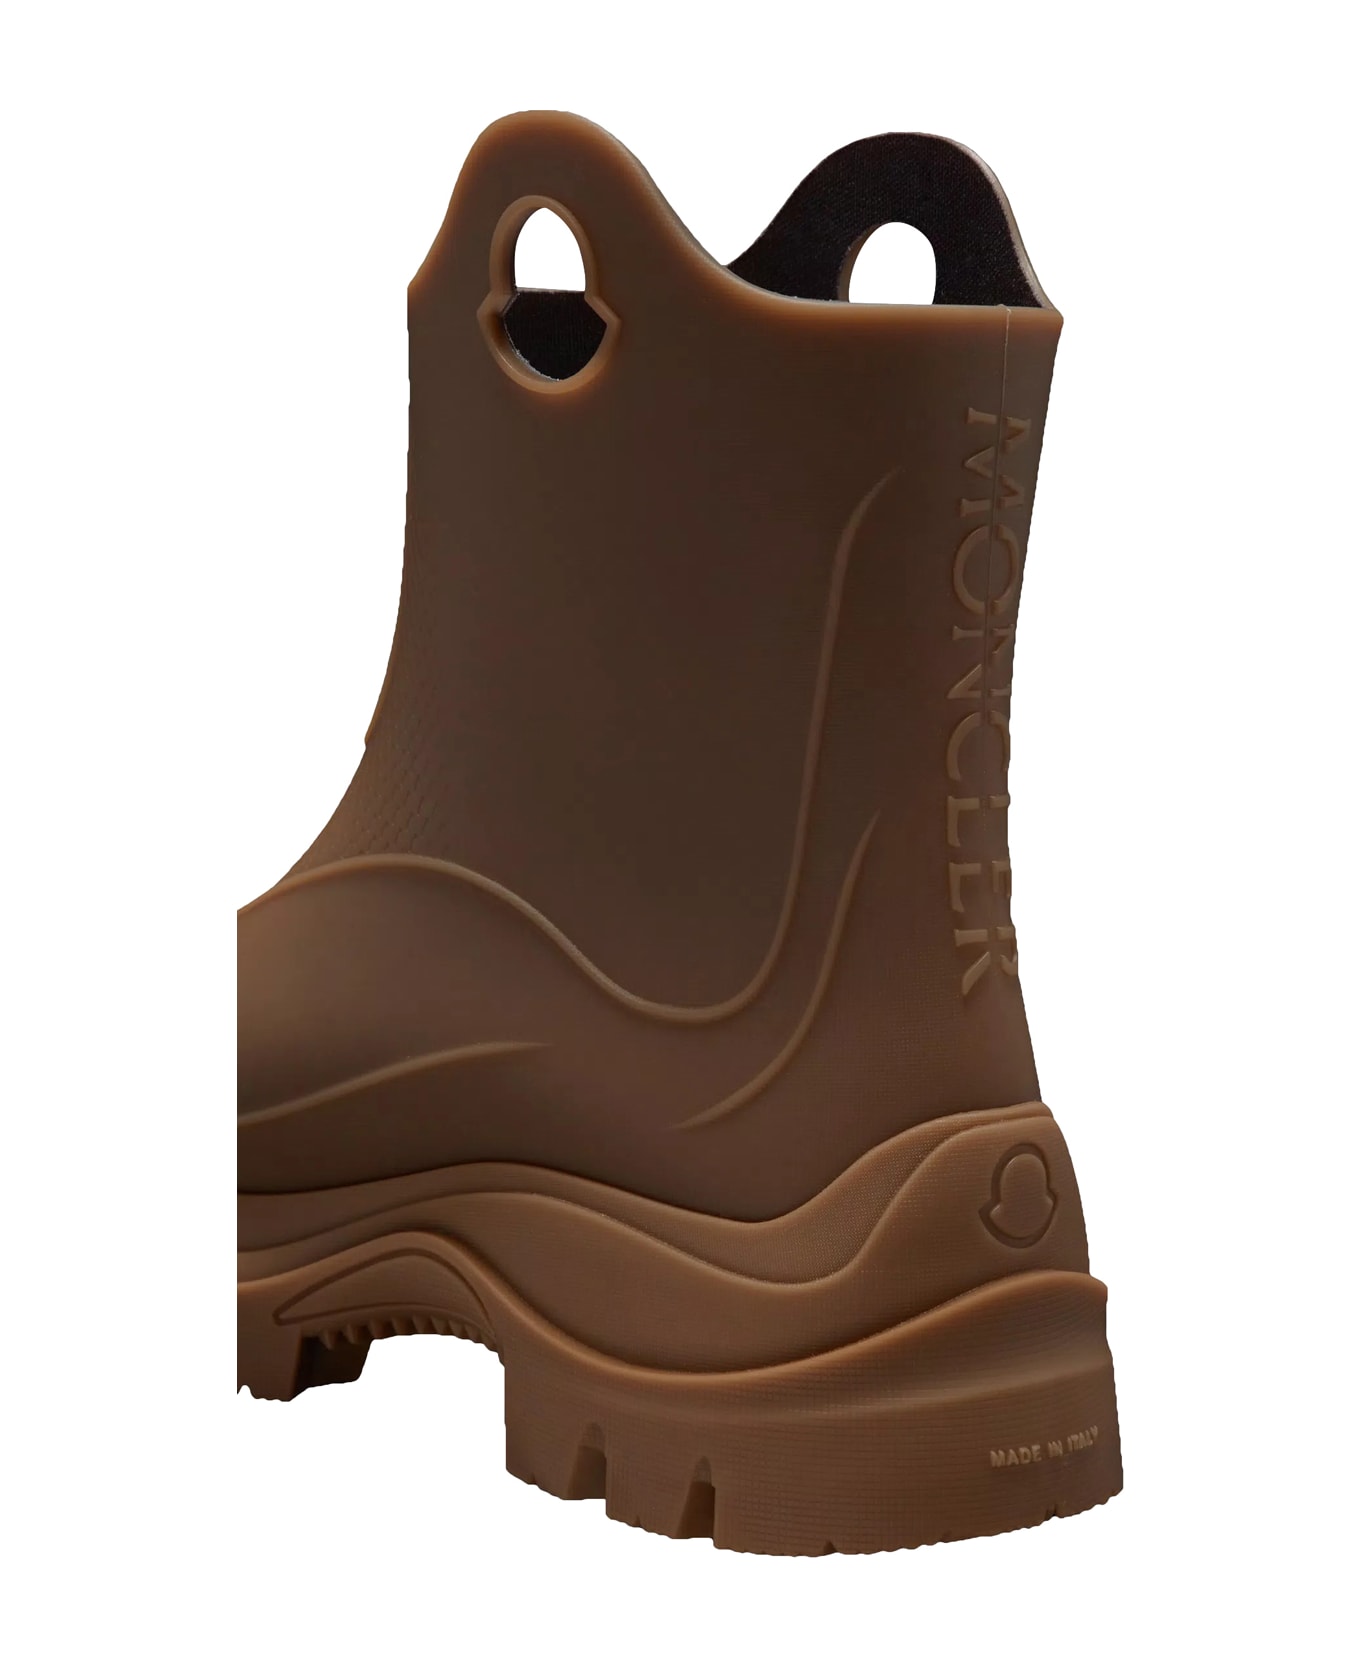 Moncler Misty Rubber Boots - brown ブーツ